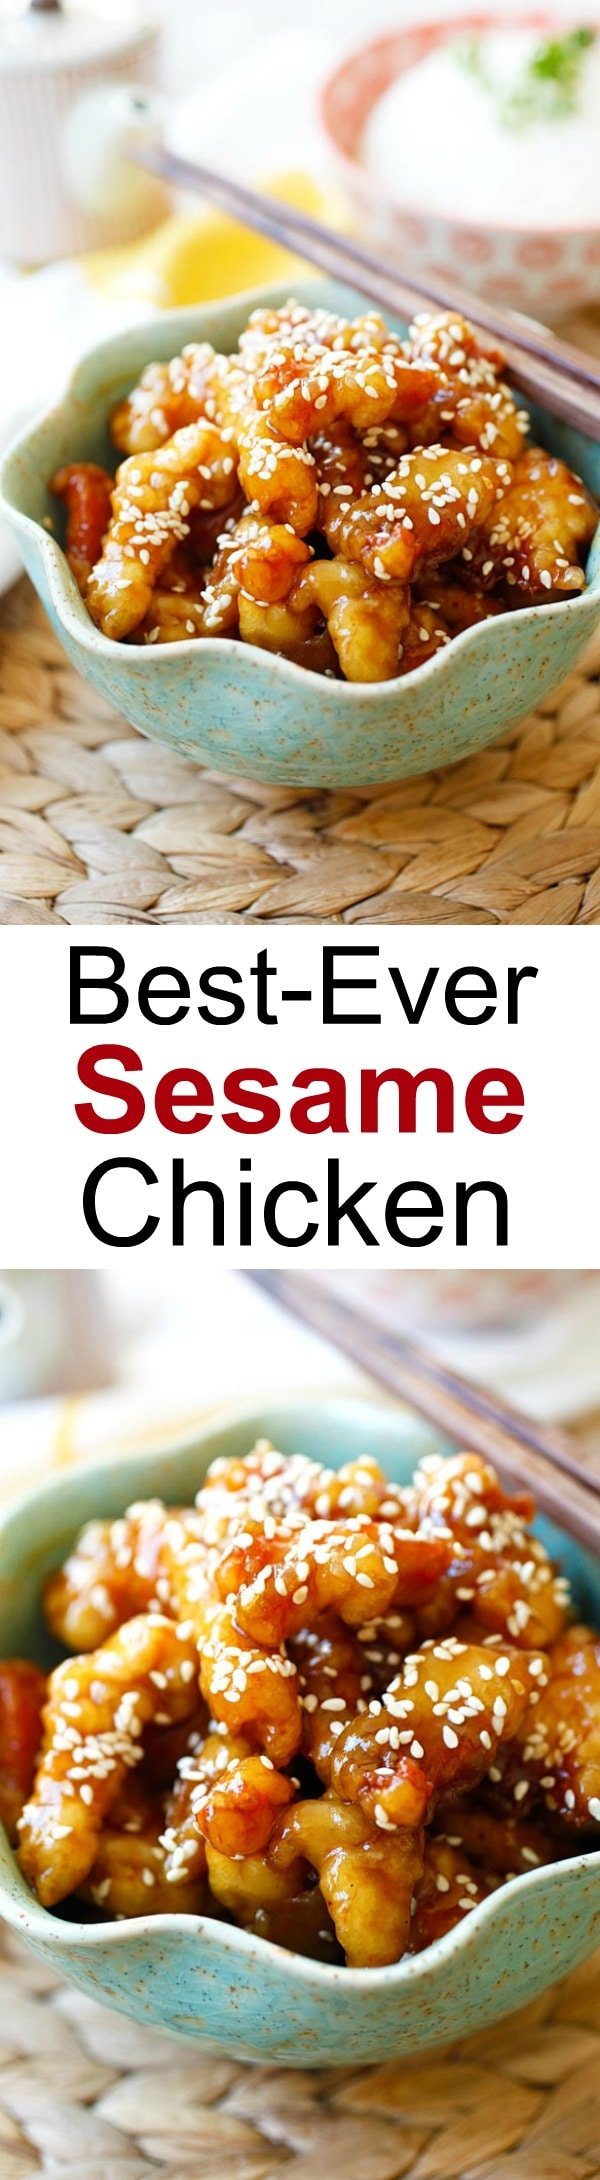 Sesame Chicken - easy, healthy and homemade Chinese Sesame Chicken recipe with sesame sauce. This is the BEST recipe you'll find online and tastes just like takeout restaurants. | rasamalaysia.com